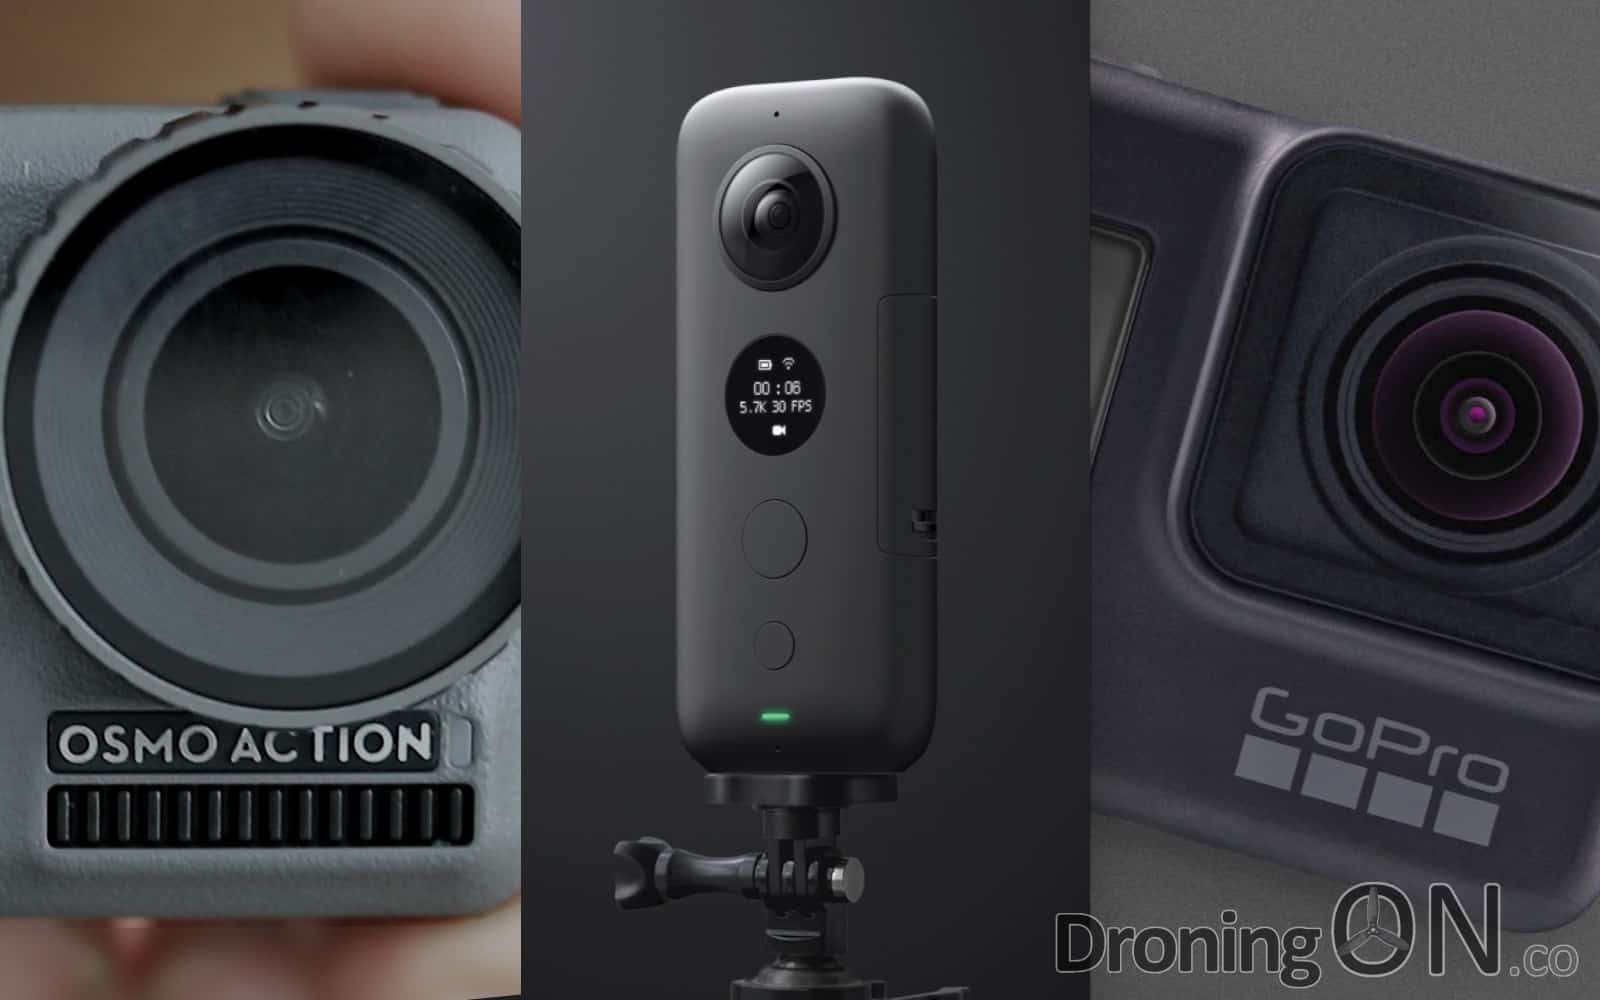 The DJI Osmo Action, Insta360 One X and the GoPro Hero 7 Black are all top-of-the-range action cameras, but how do they compare?